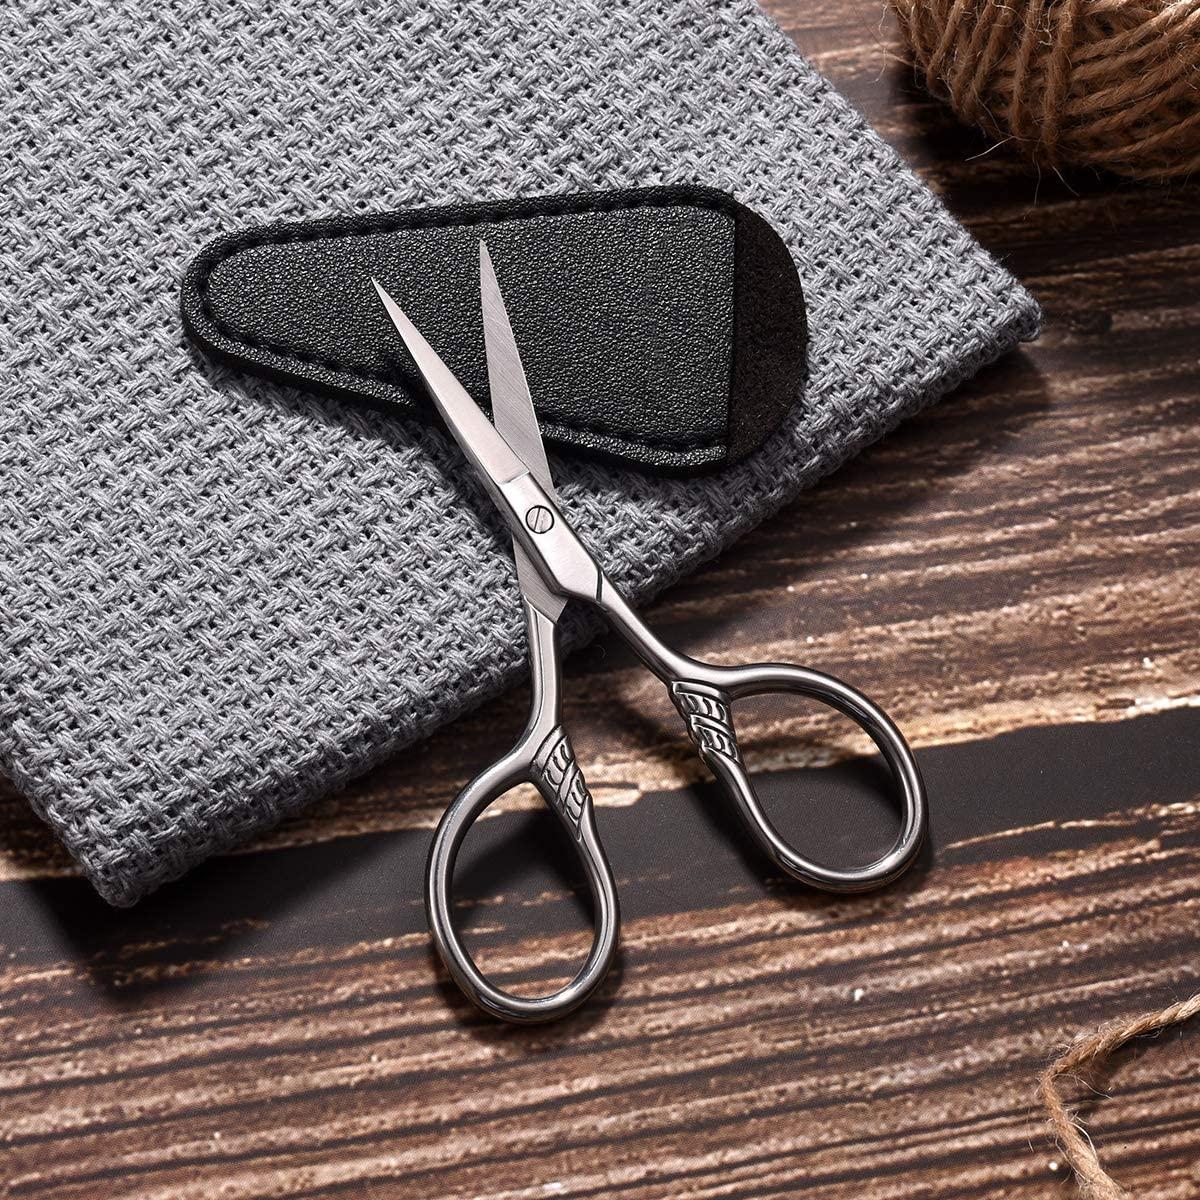 Embroidery Scissors, 4.7in Small Detail Shears Sharp Precision Craft  Scissor For Sewing